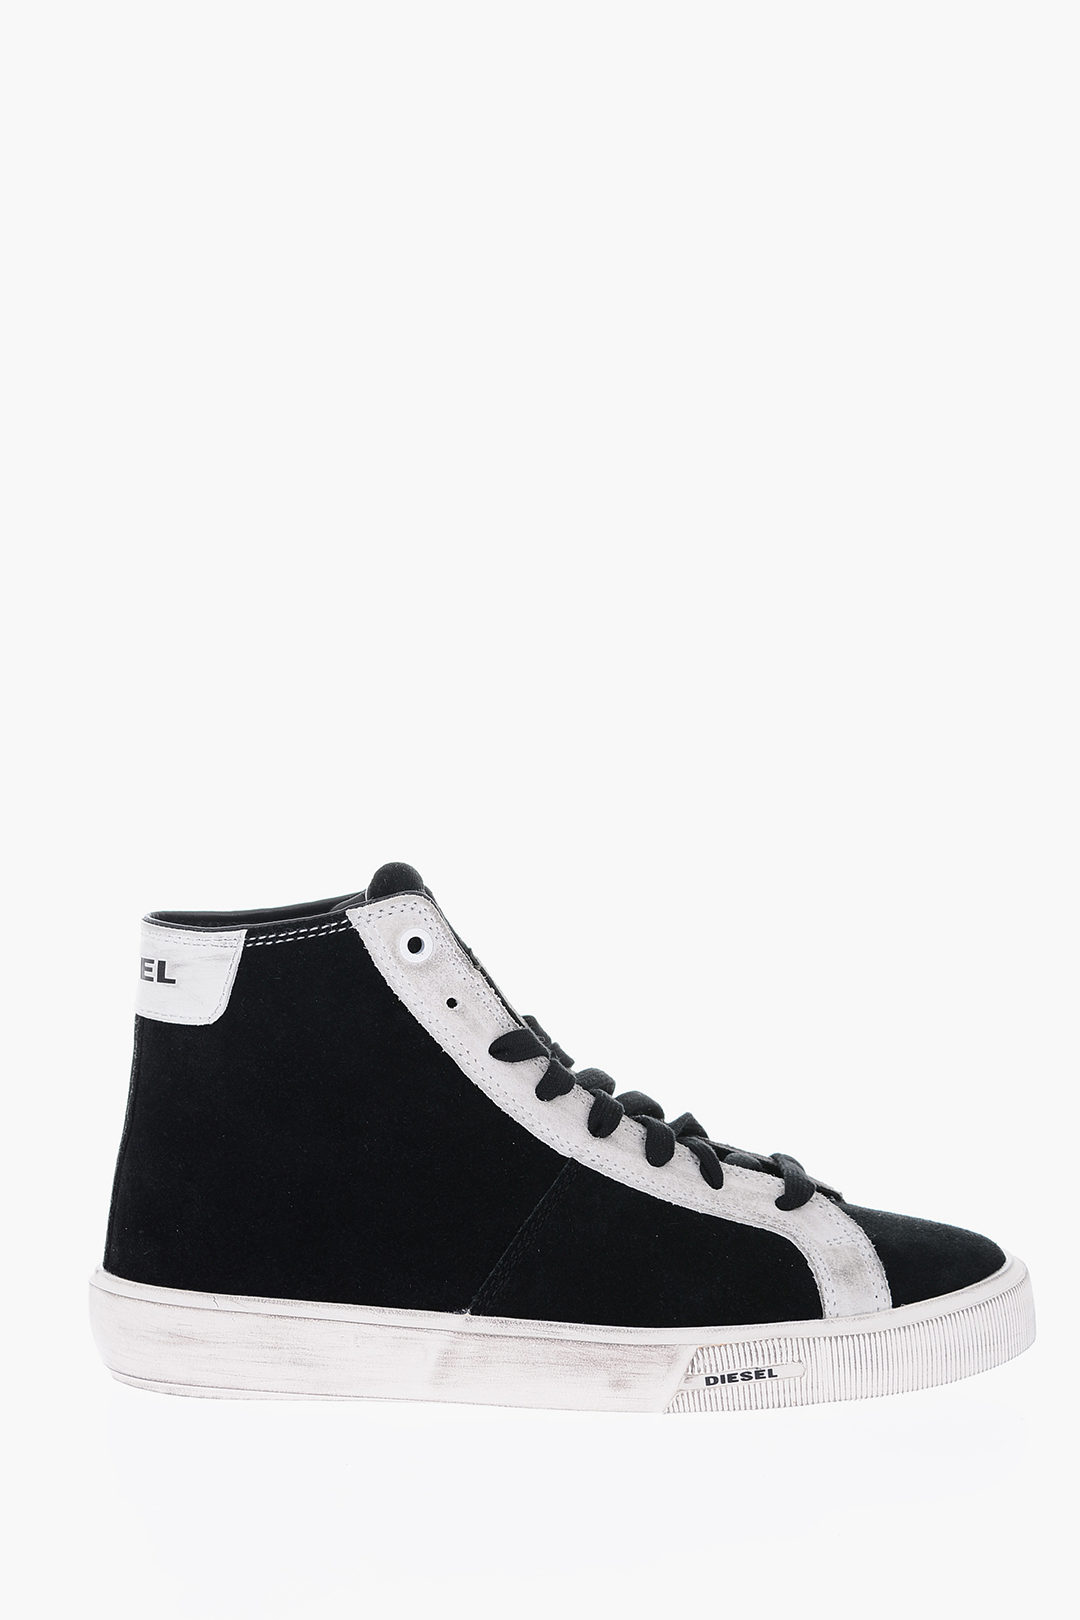 Diesel suede leather S-MYDORI MC high top sneakers men - Glamood Outlet